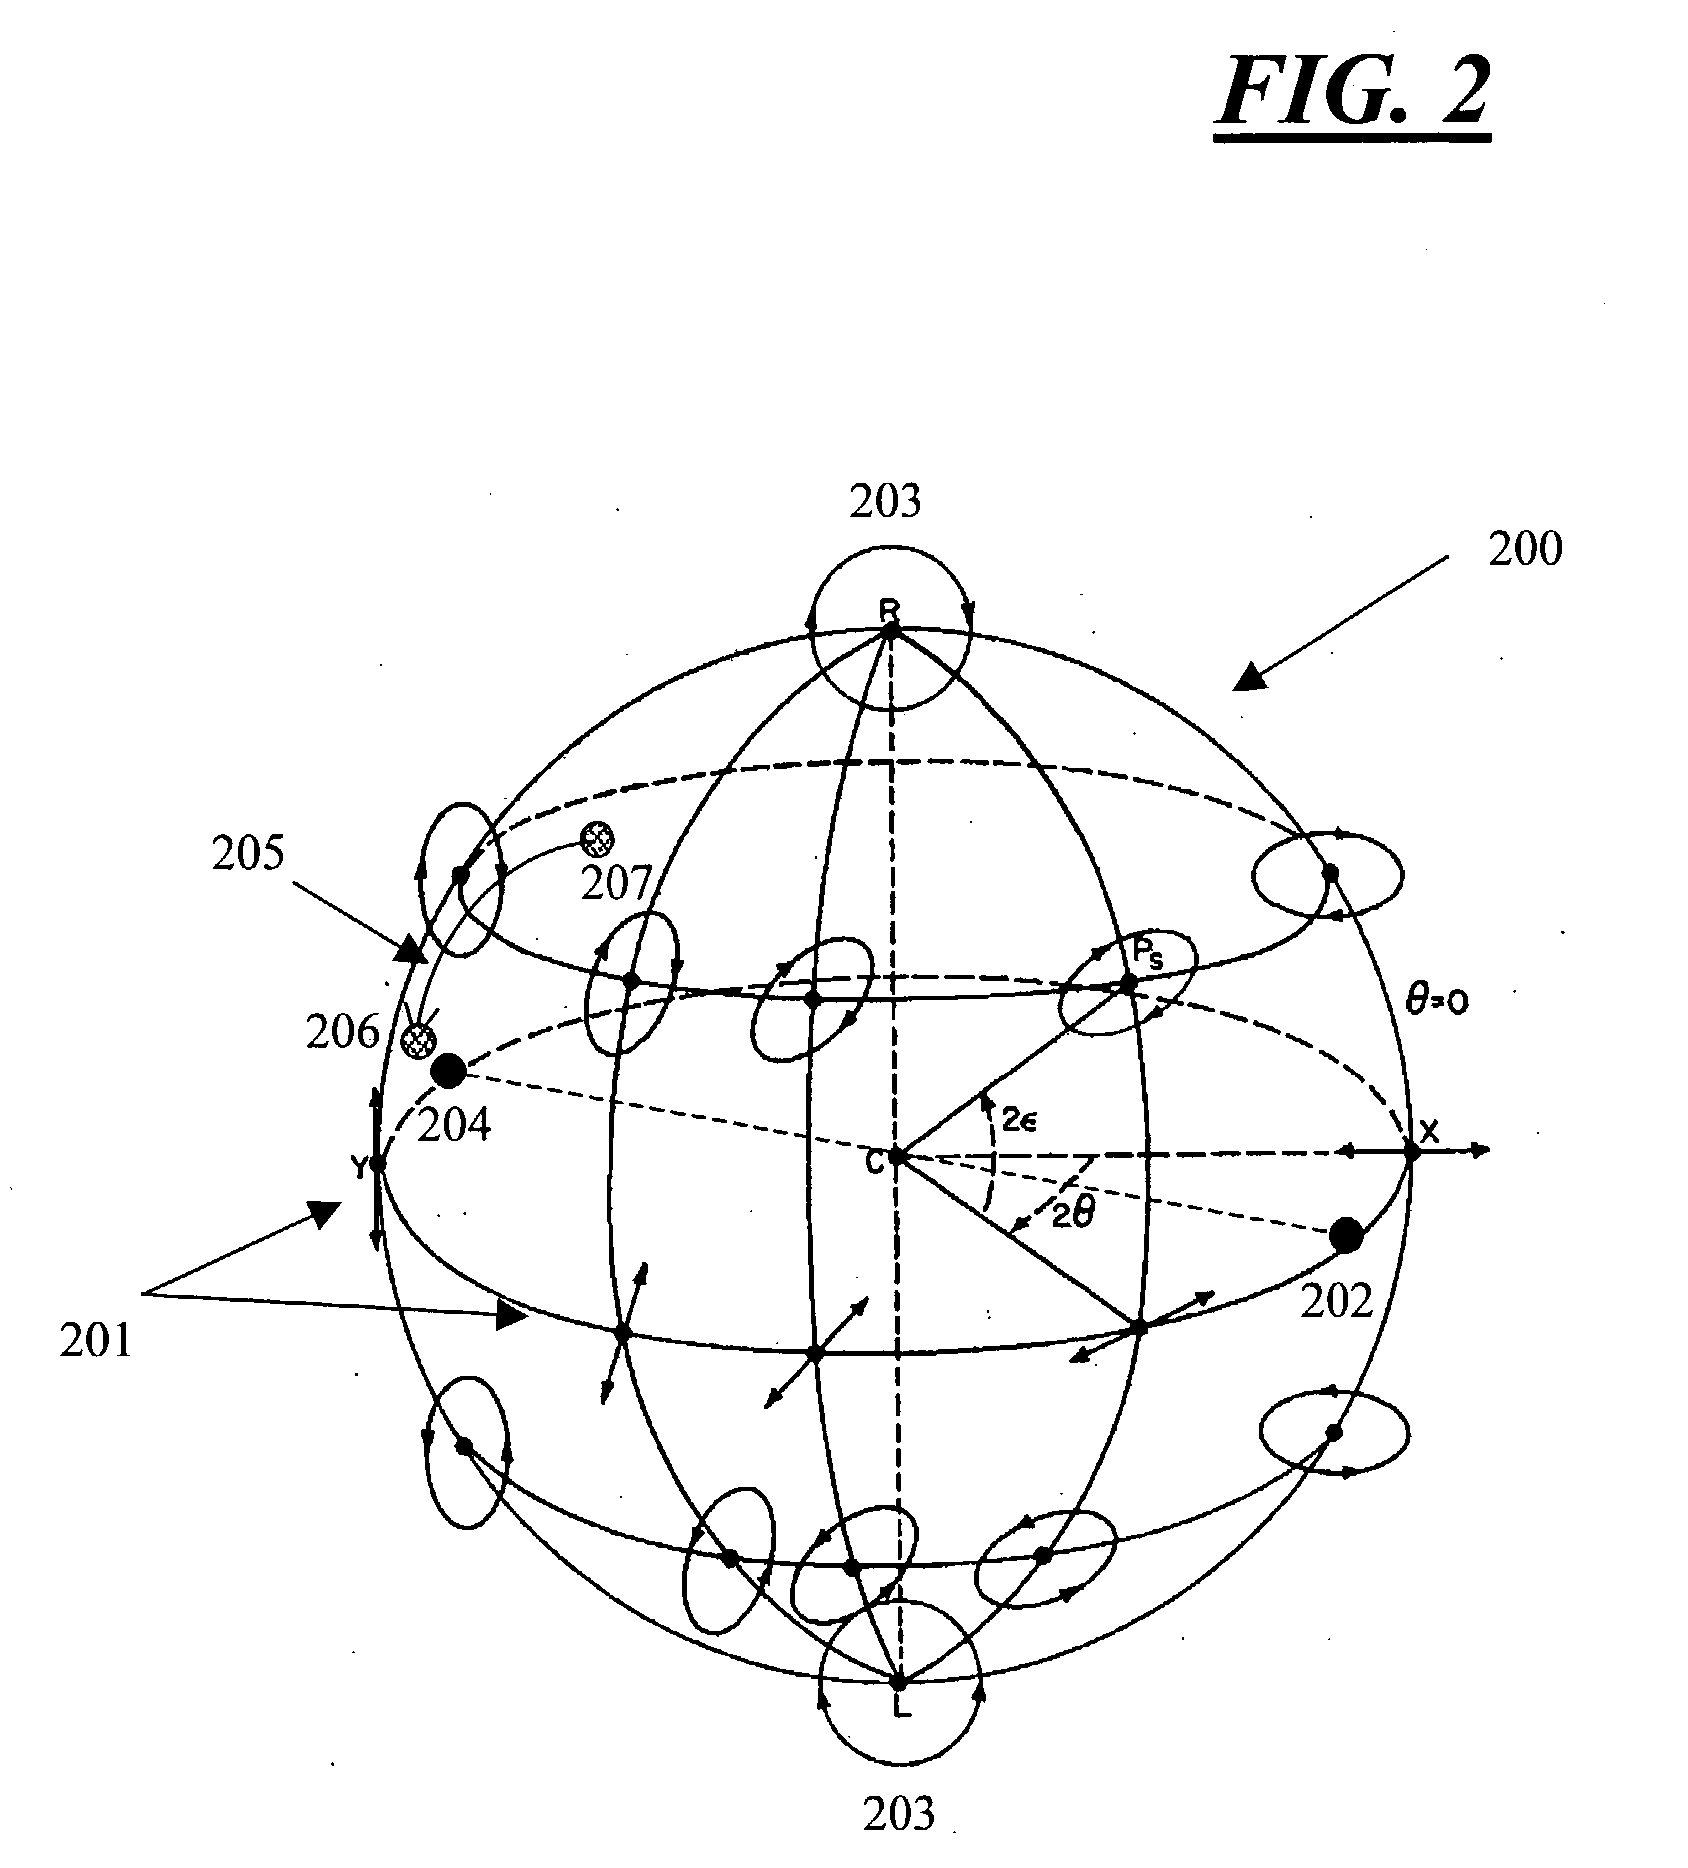 Optical signal-to-noise monitor having increased coherence